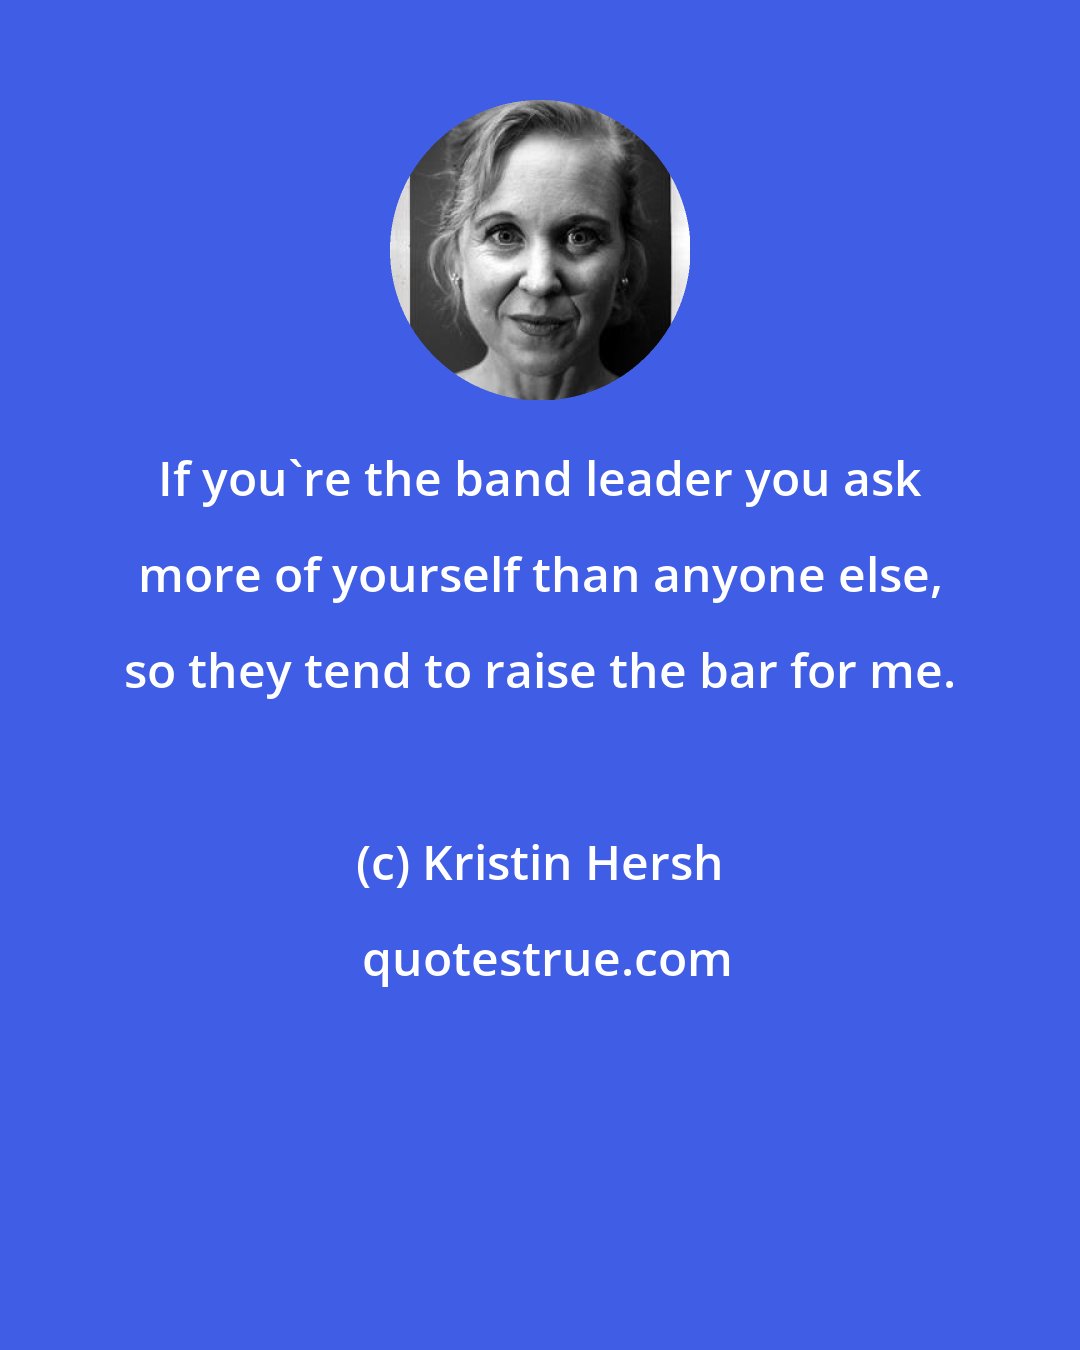 Kristin Hersh: If you're the band leader you ask more of yourself than anyone else, so they tend to raise the bar for me.